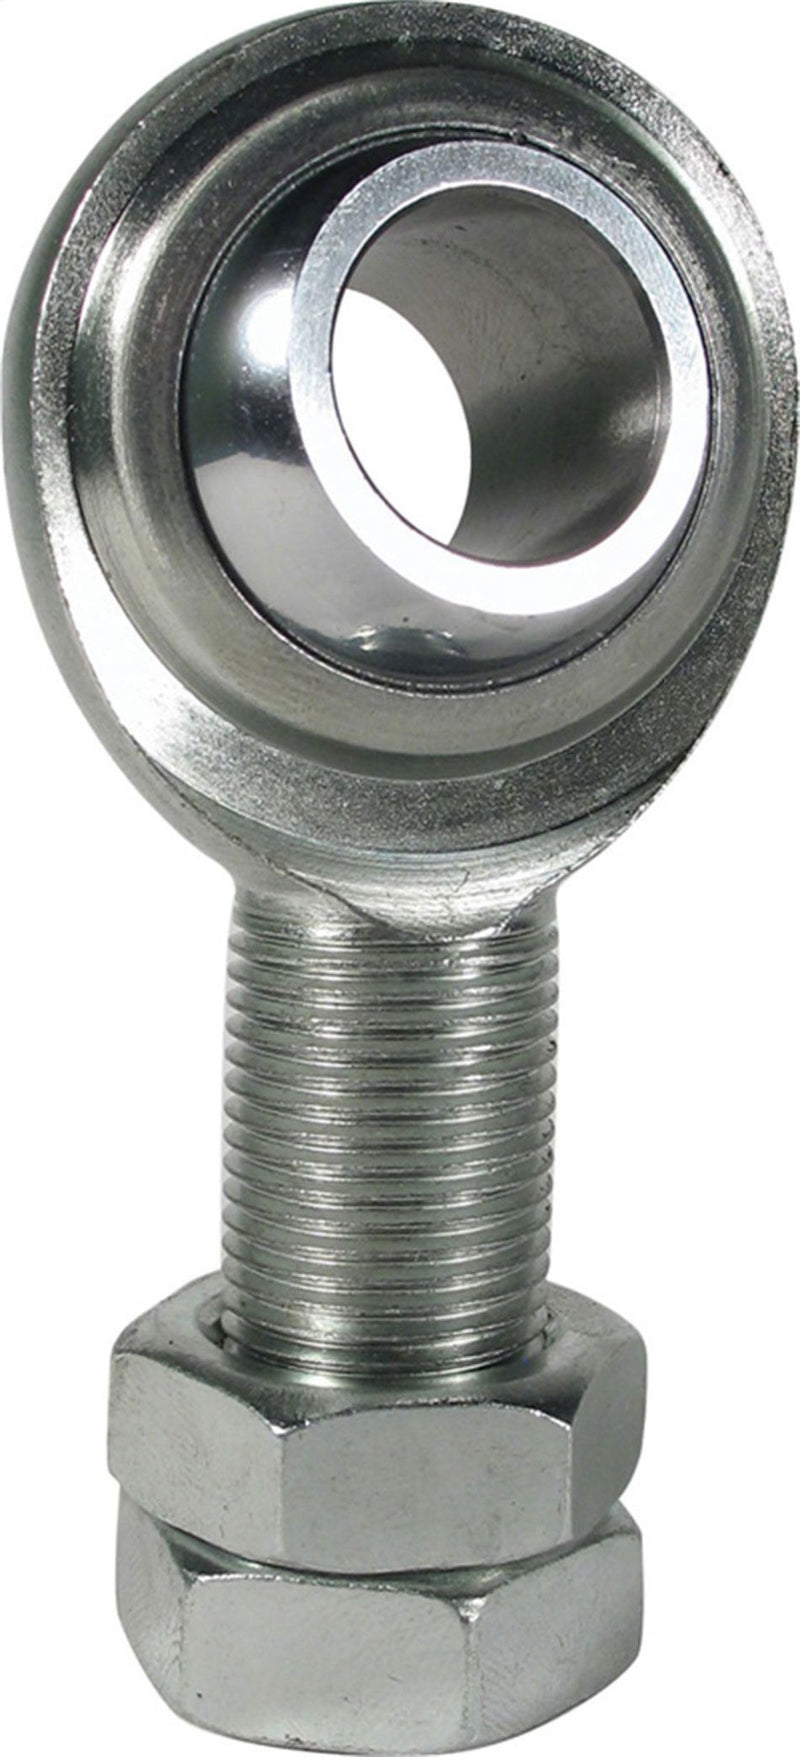 Borgeson Borgeson Stainless Steel Rod End Bearing - Plain Finish BOR710000